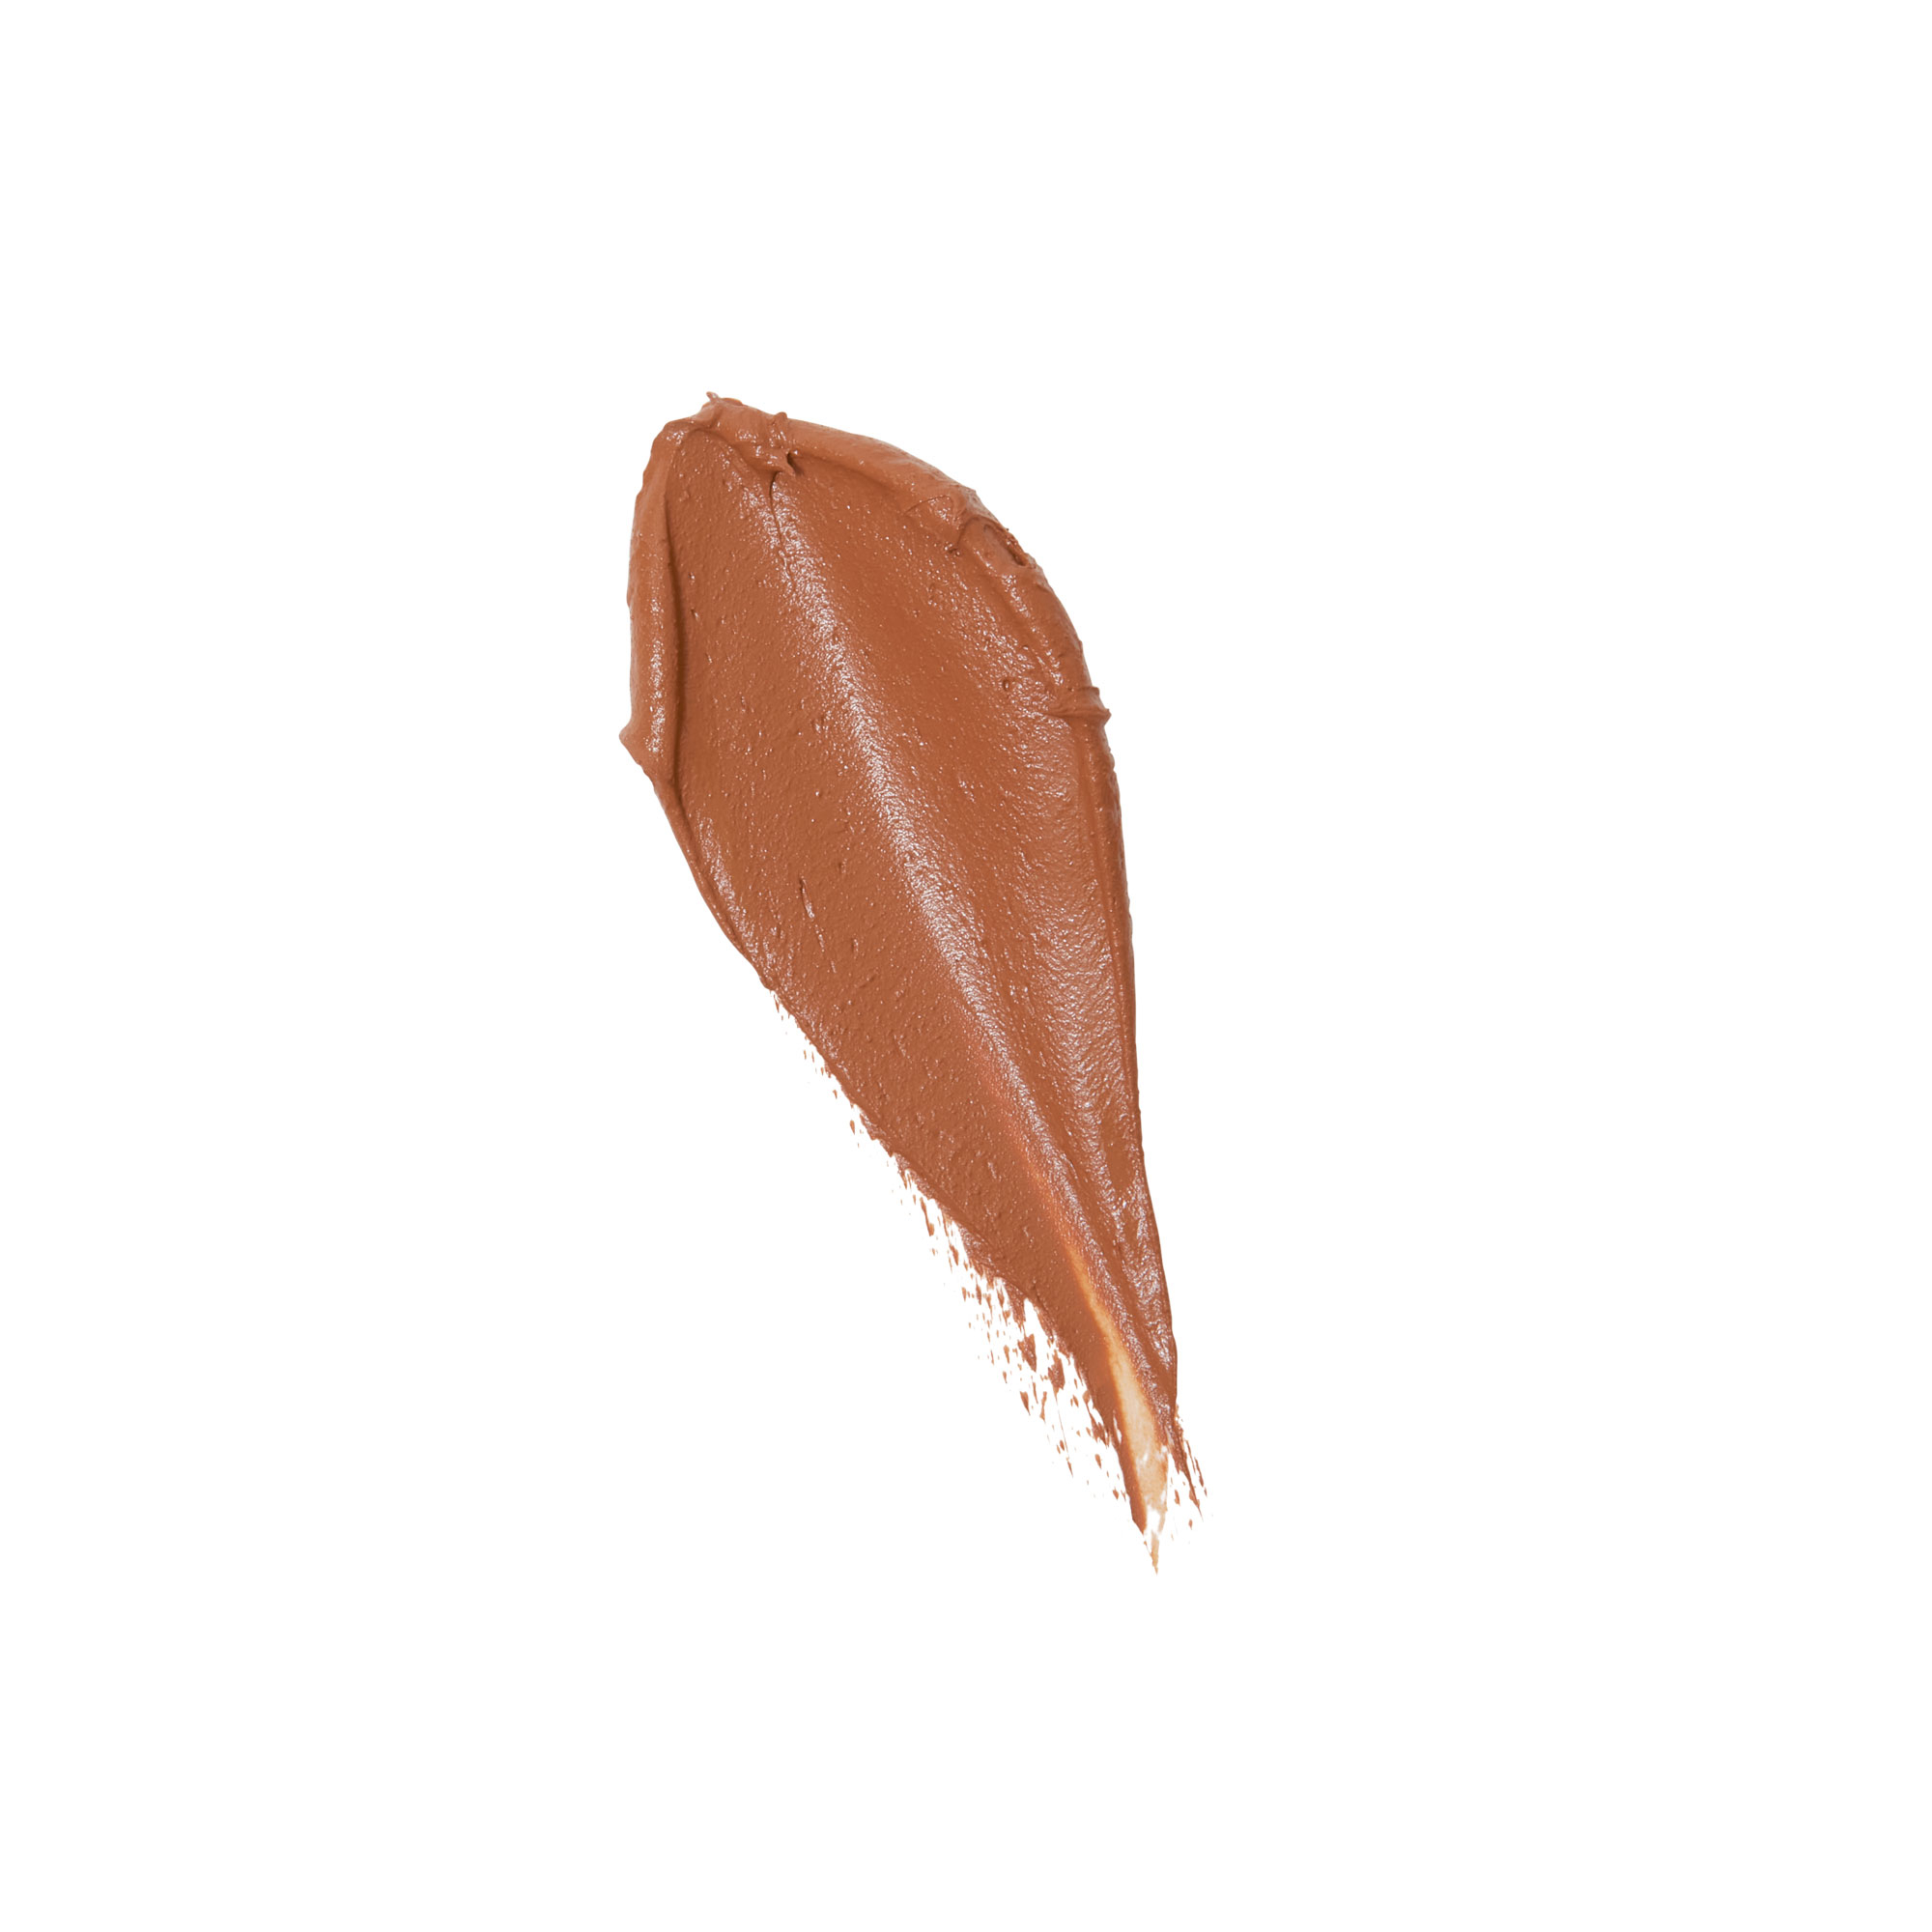 Benefit Cosmetics Boi-ing Industrial Strength Concealer, in Colour: 05 Tan Neutral, Size: 3.0g